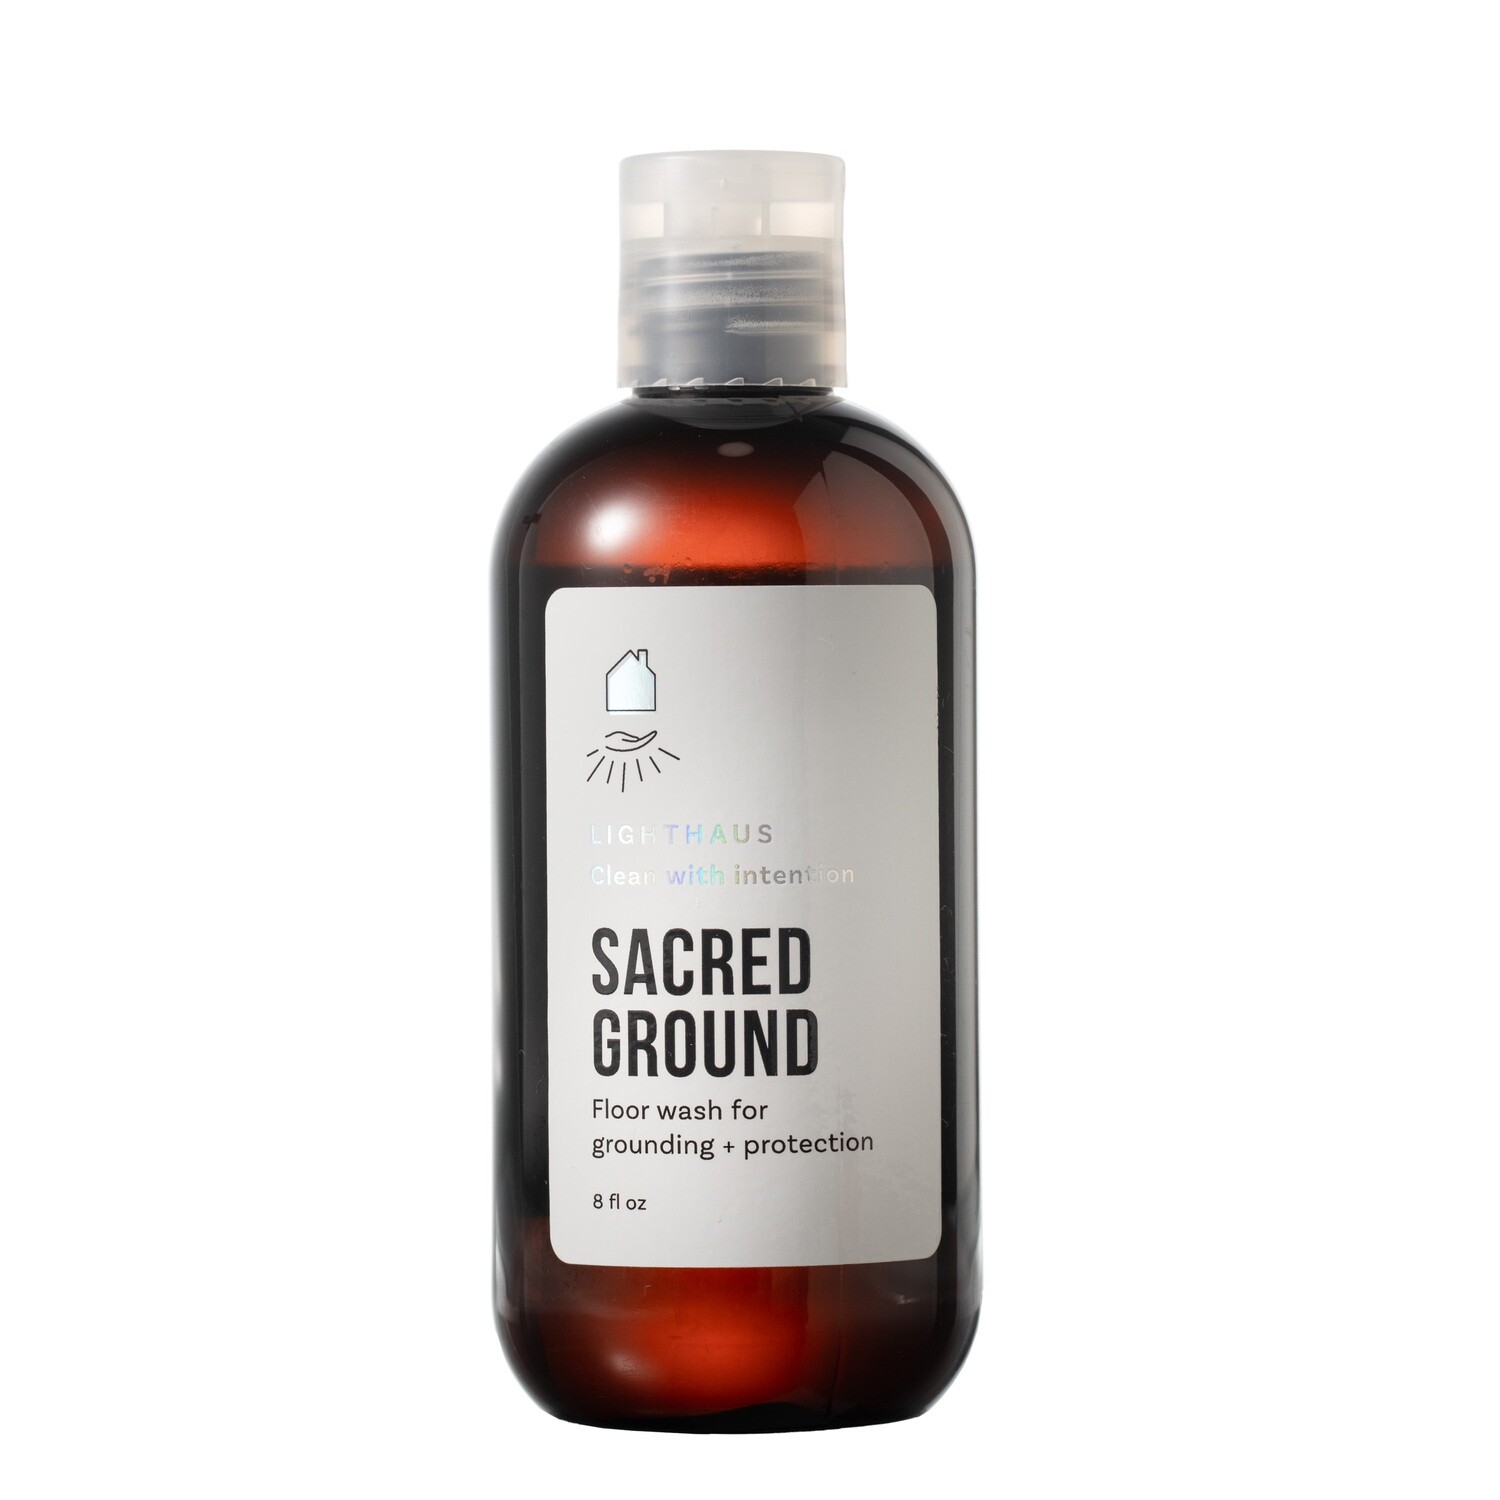 SACRED GROUND: Spruce and Arborvitae Floor Cleaner for Grounding + Protection